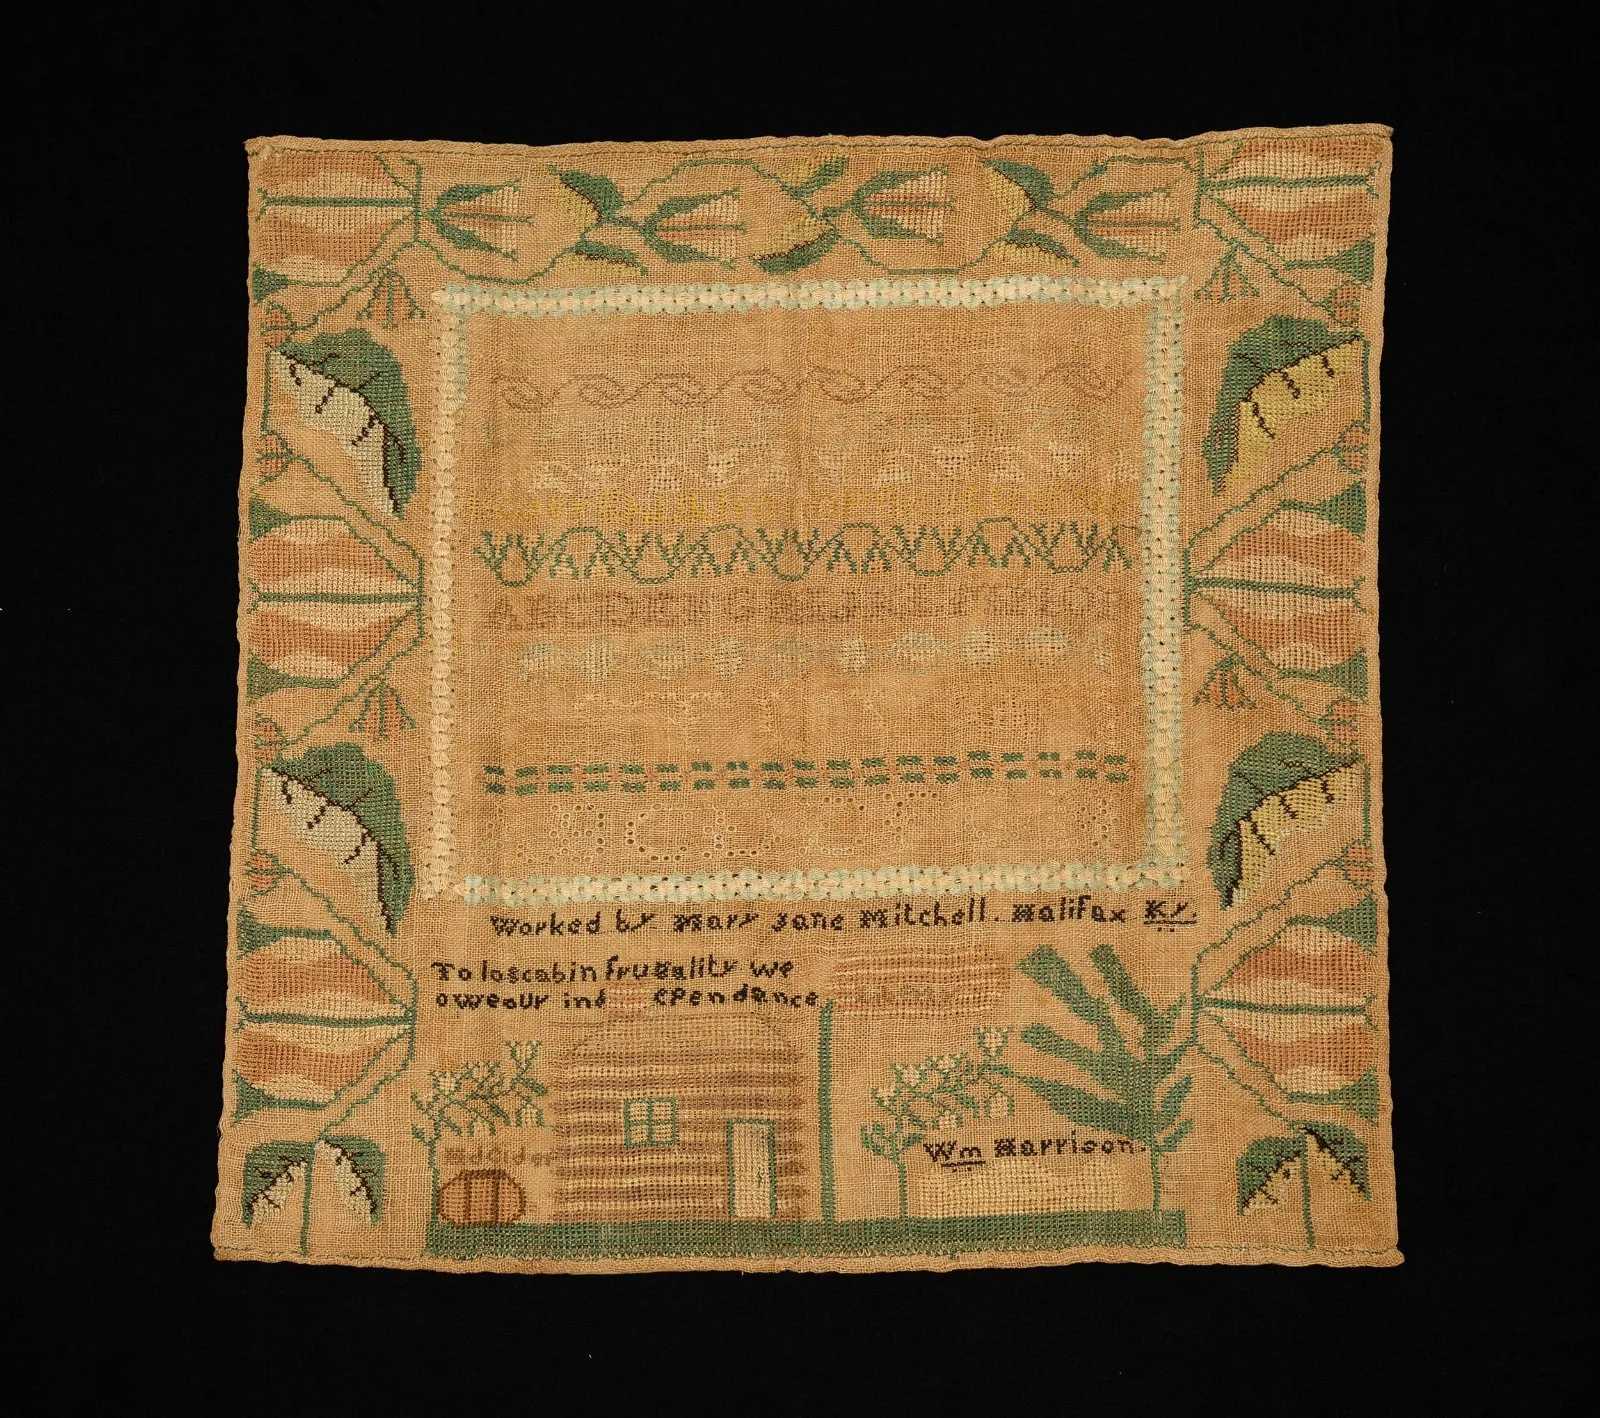 Needlework sampler mentioning US presidential candidate William Henry Harrison, estimated at $4,000-$8,000 at Amelia Jeffers on May 4.